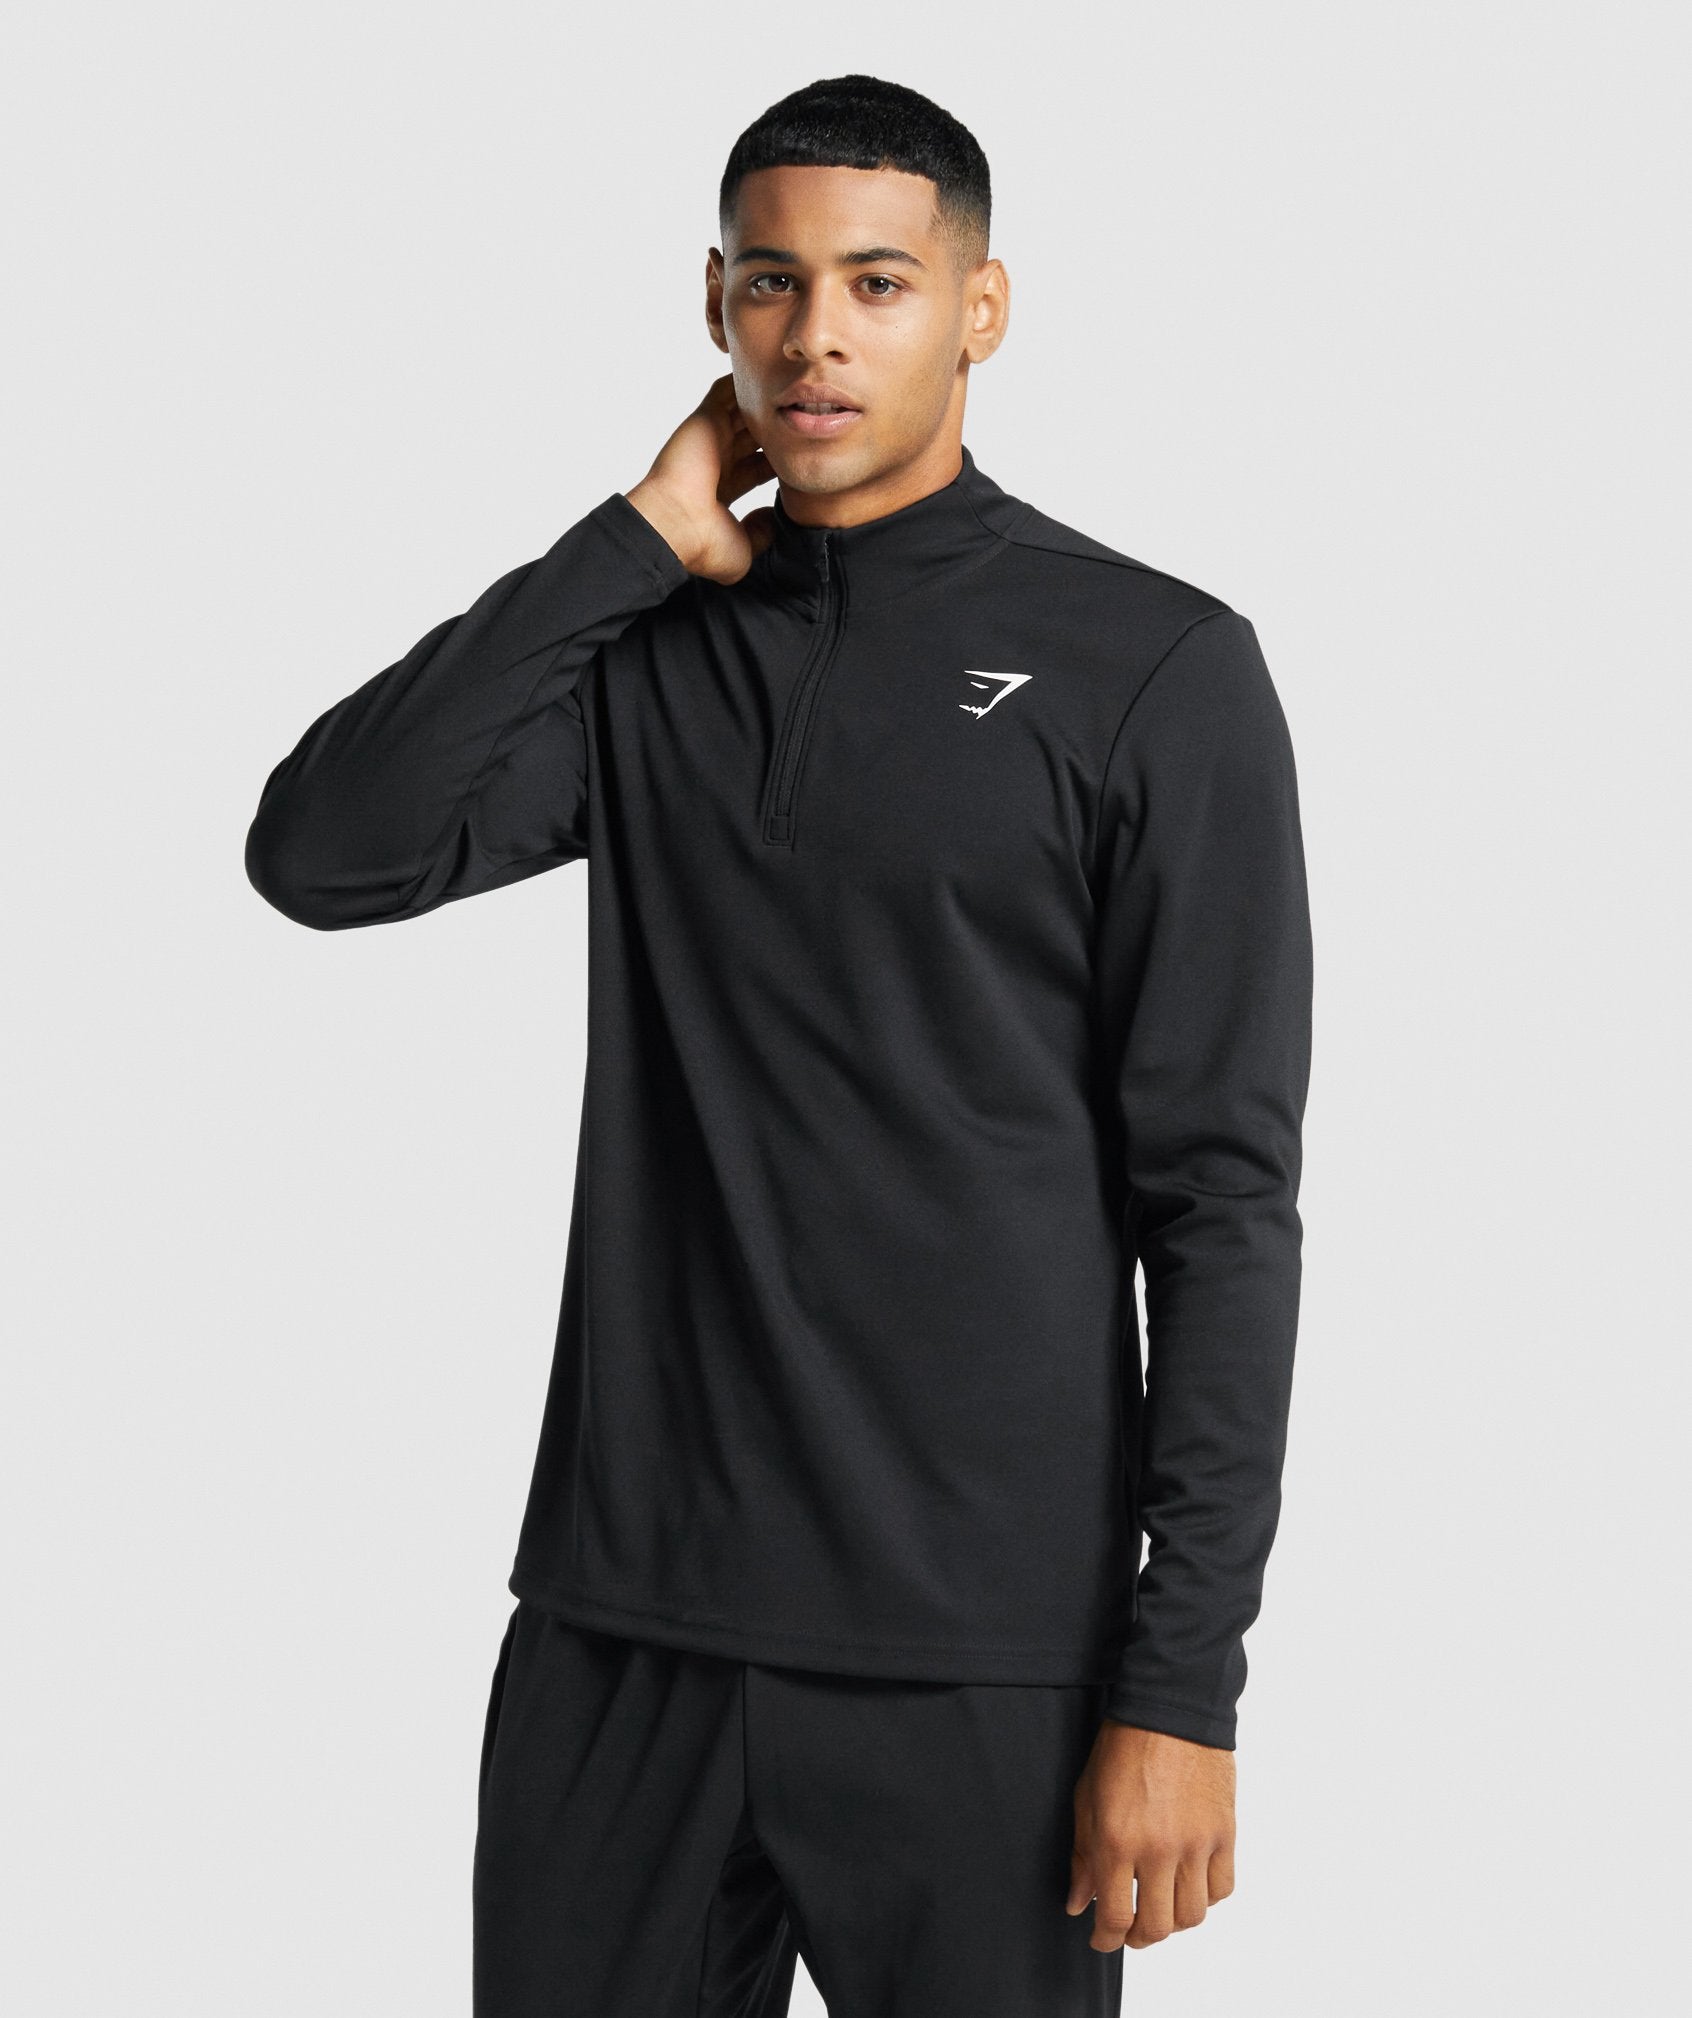 Arrival 1/4 Zip Pullover in Black - view 1